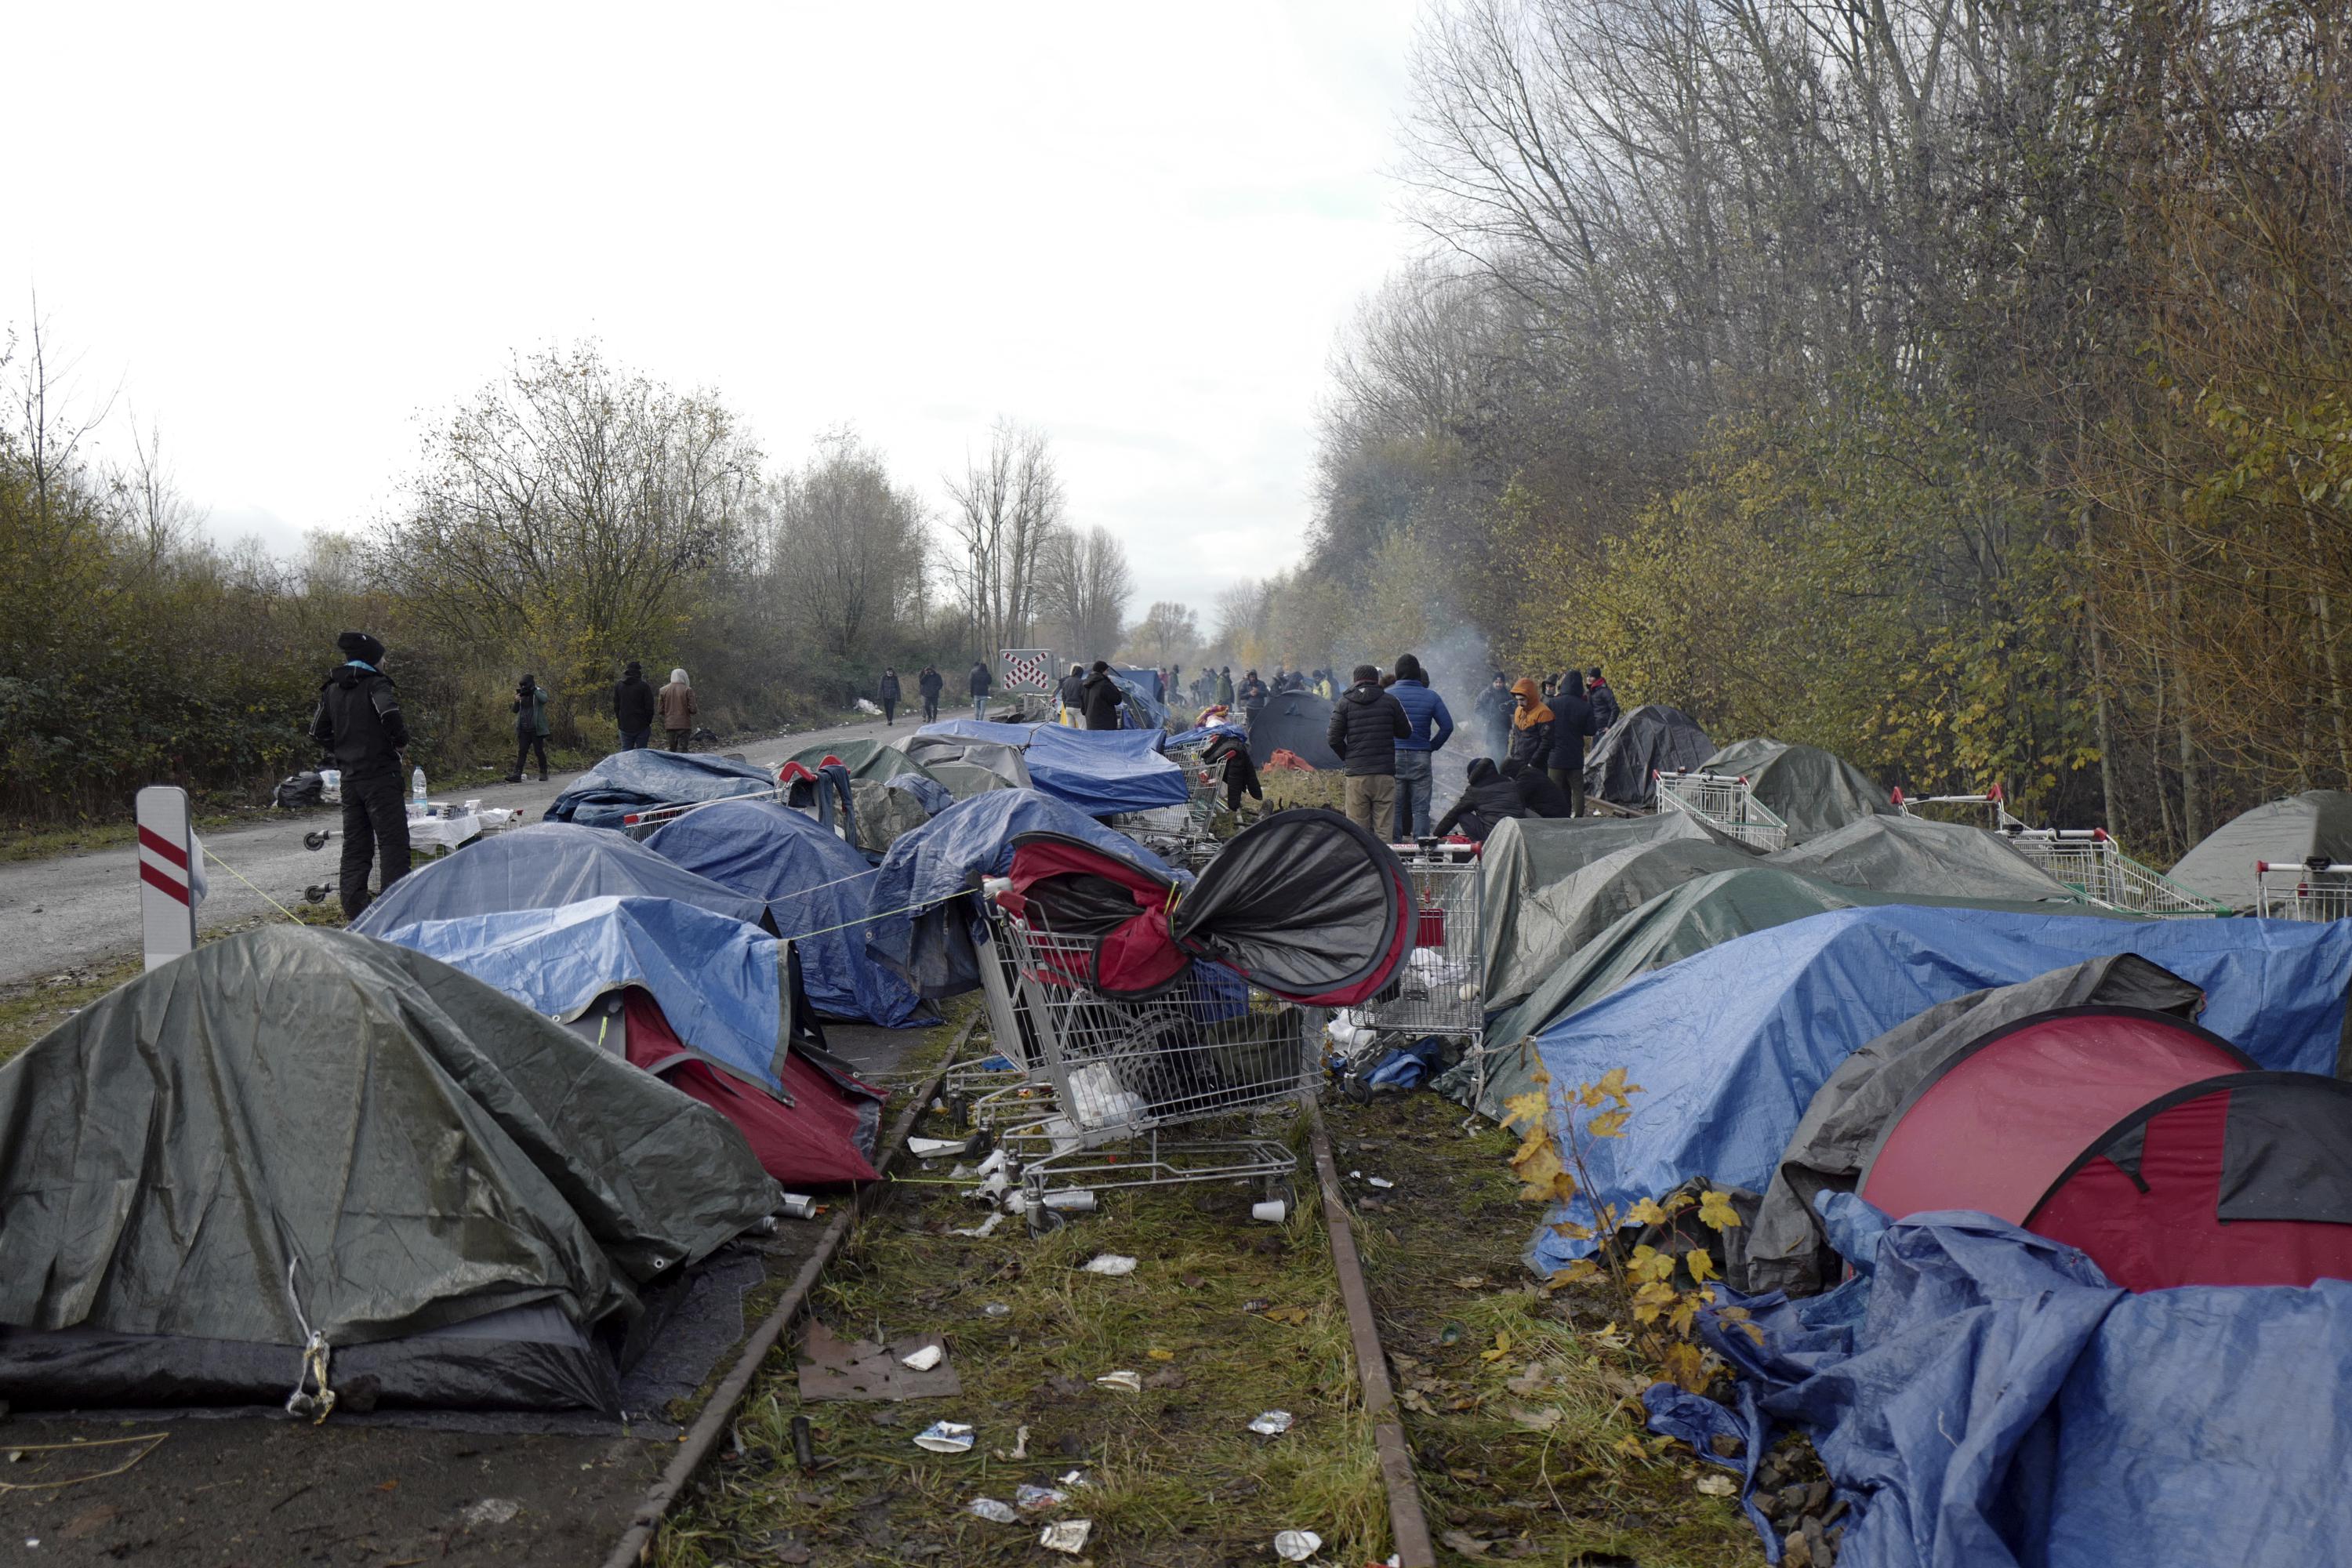 Camped in Calais, migrants renew resolve to try for England